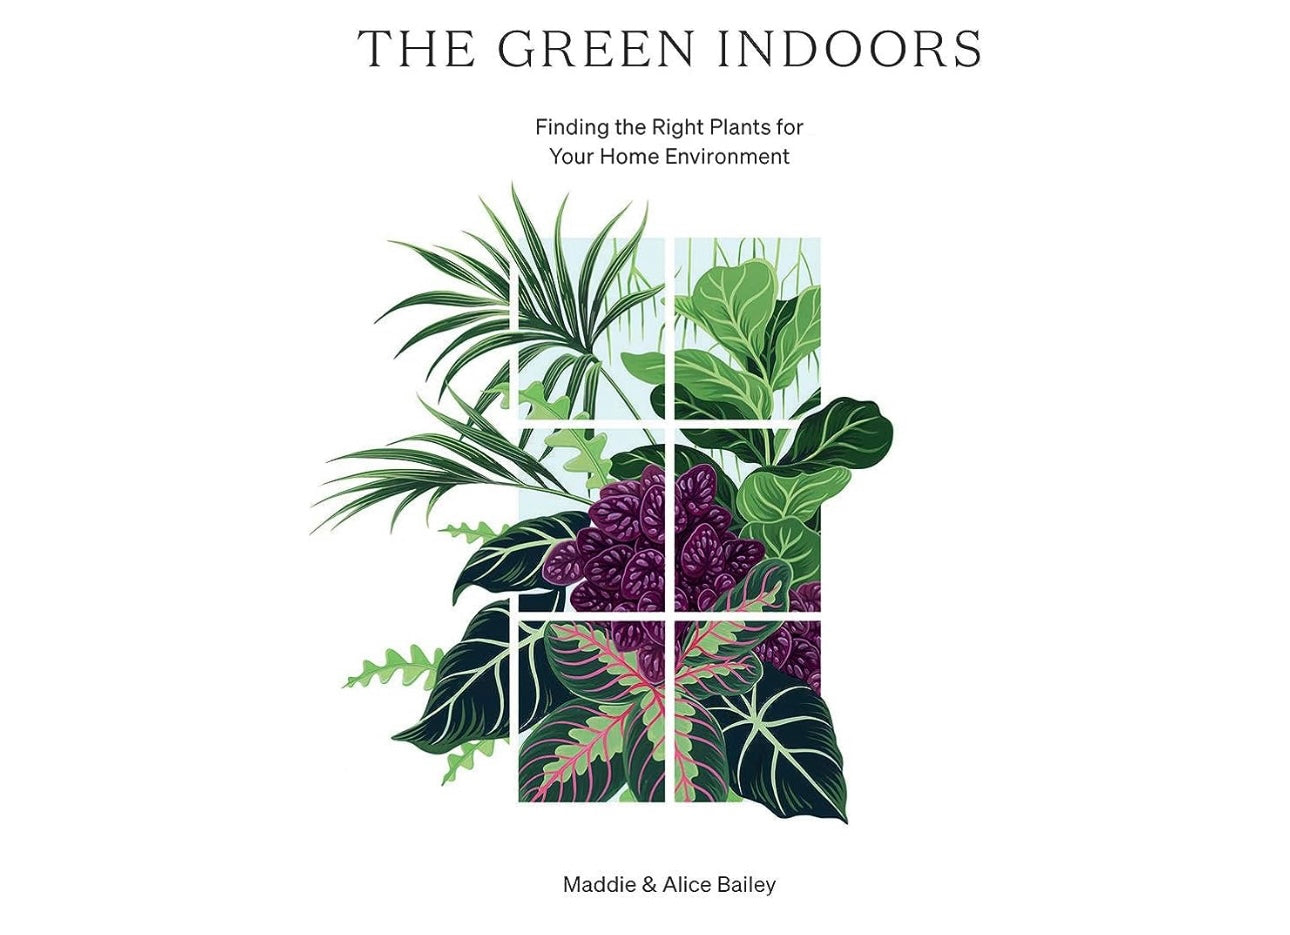 Book - The Green Indoors